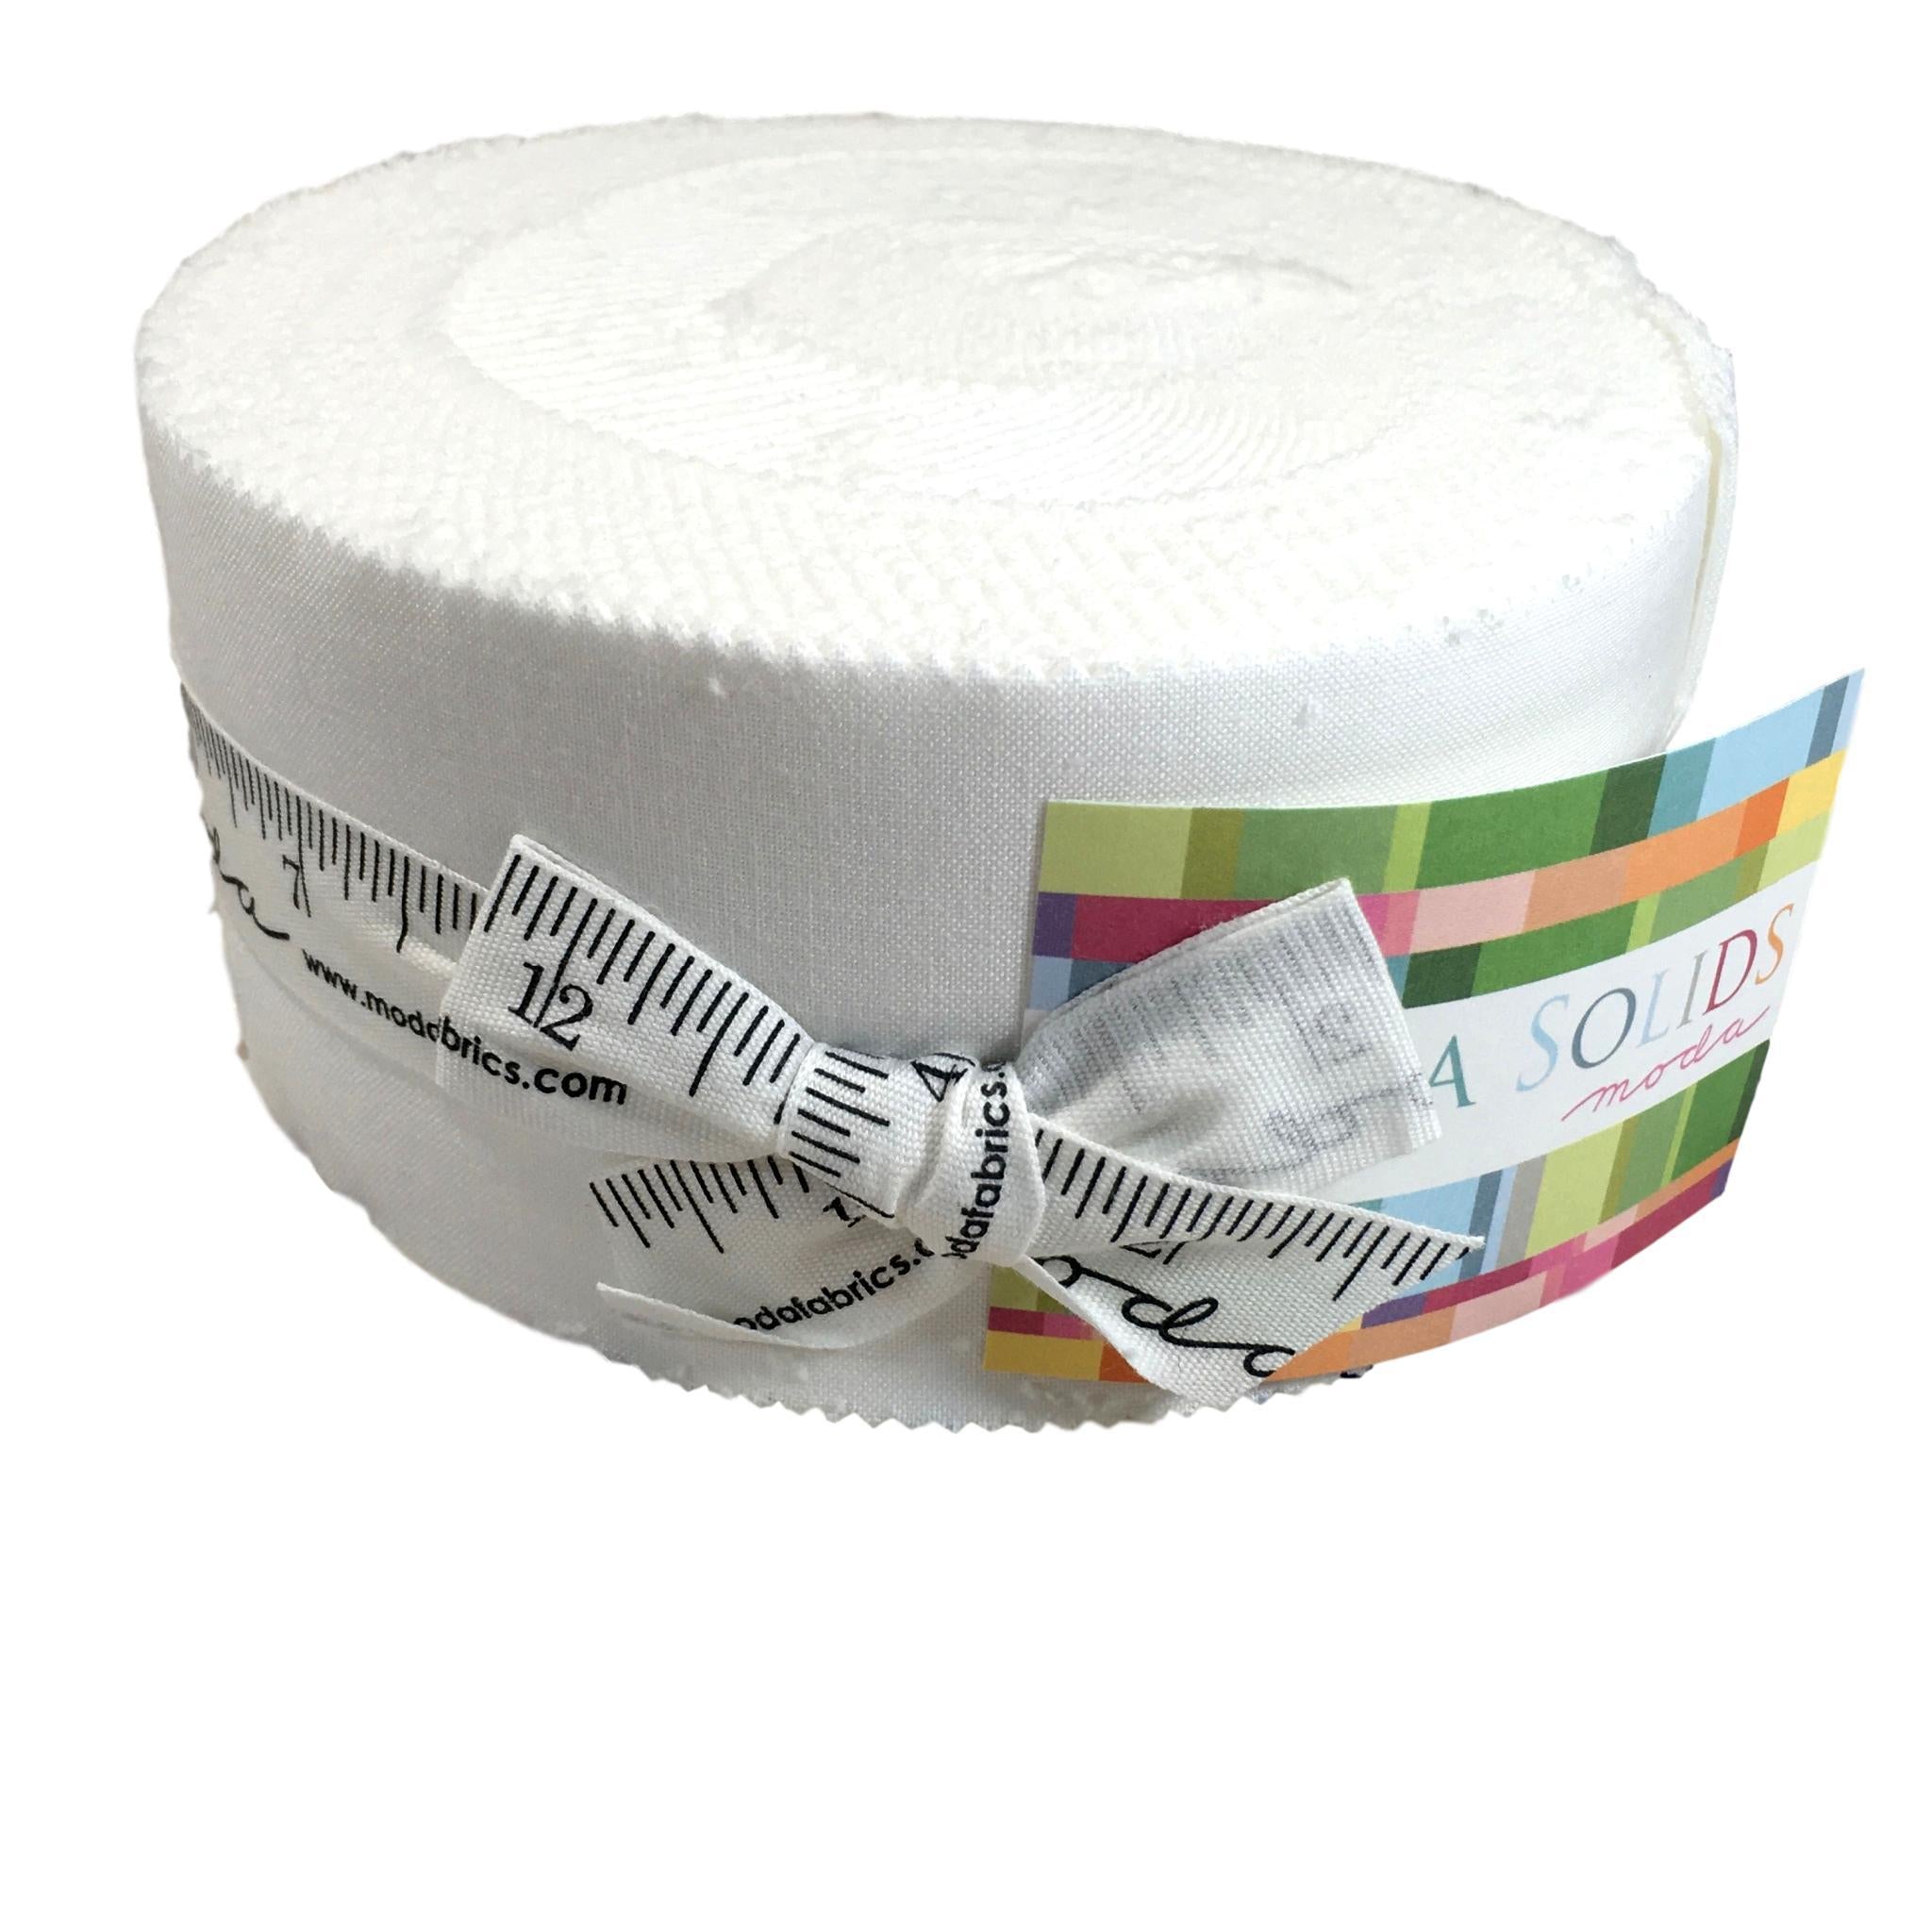 Bella Solid White 2½" Jelly Roll